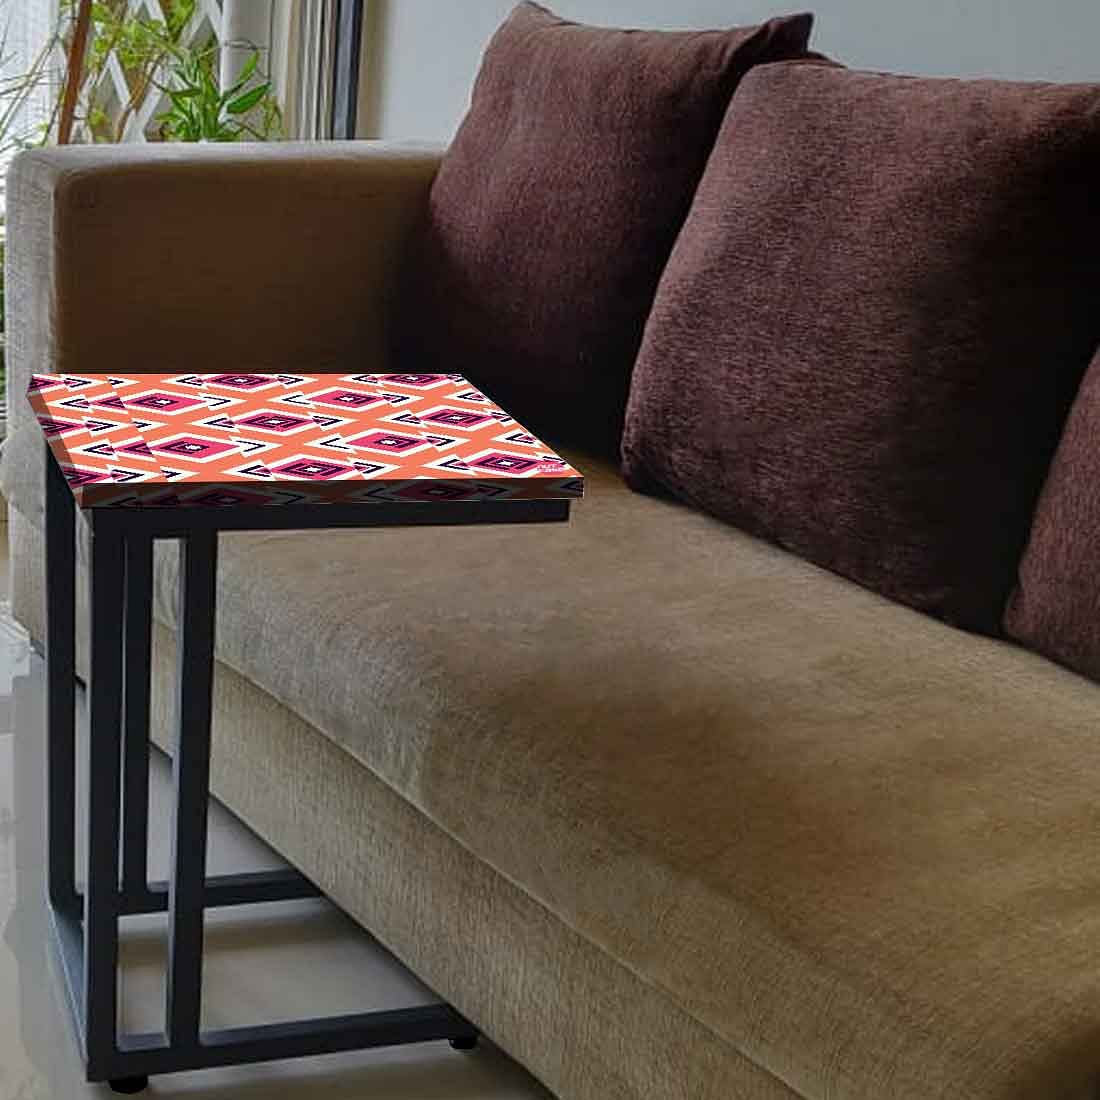 C Shaped Outdoor Table For Sofa - Diamond Pattern Nutcase